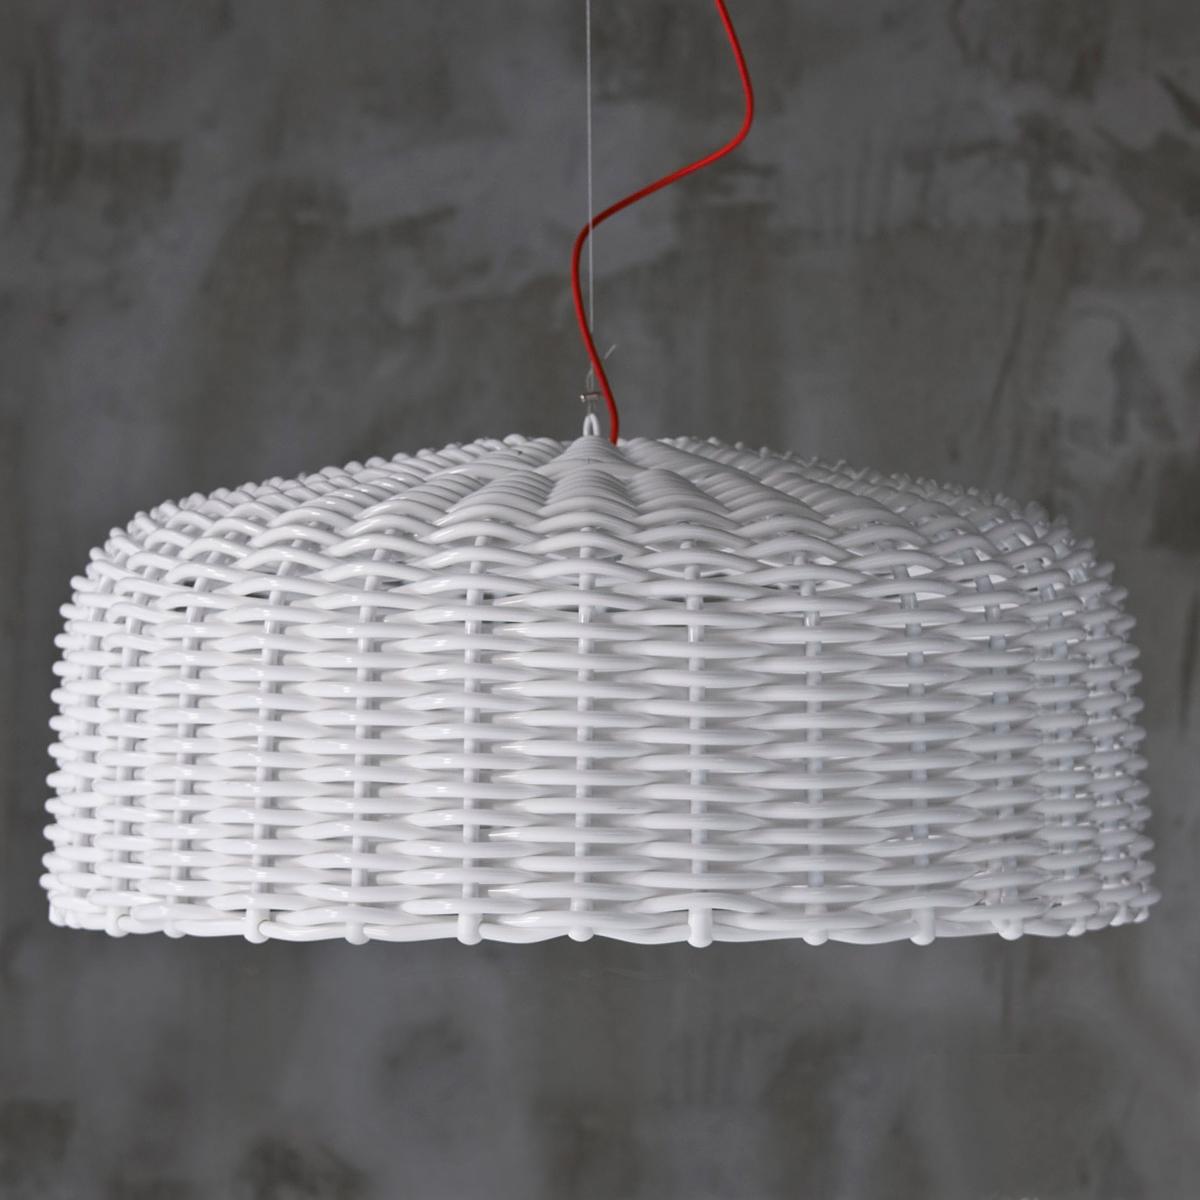 Suspension Ambra White all in woven PVC in white glossy finish.
For 1 bulb, lamp holder type E27, max 18 Watt, 220 Volts.
Bulb not included. Delivered with 250cm electric cable and 
with 200 cm steel cable.
Also available in woven PVC in black